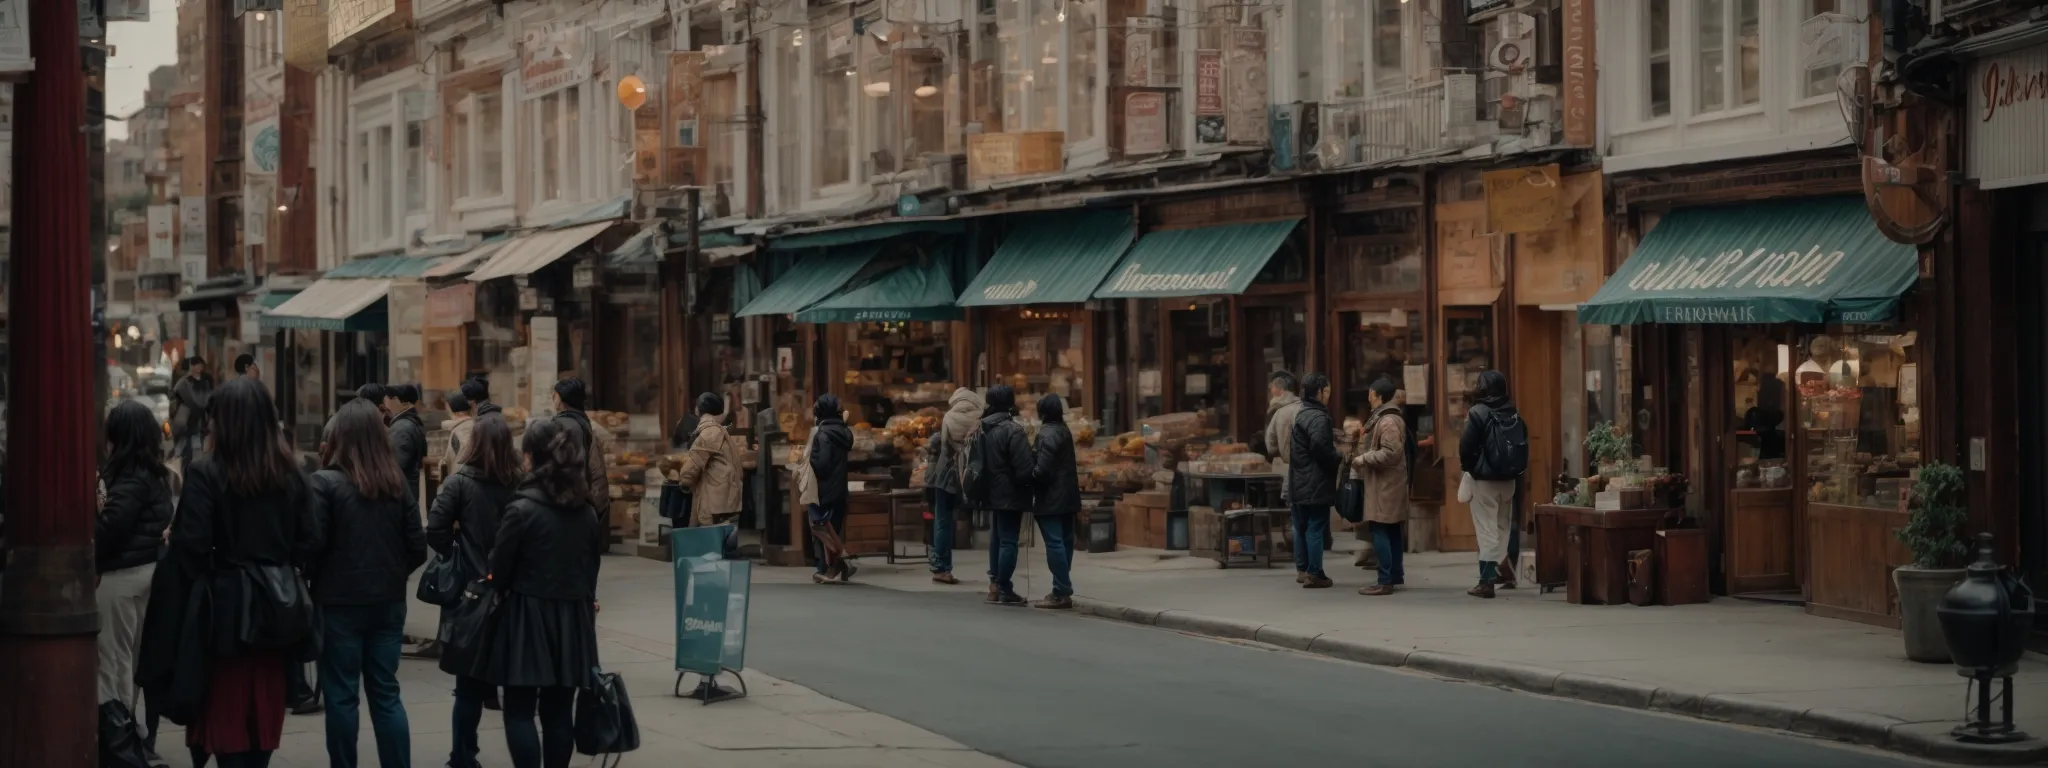 a bustling street view showcasing diverse storefronts with people interacting and engaging with local businesses.